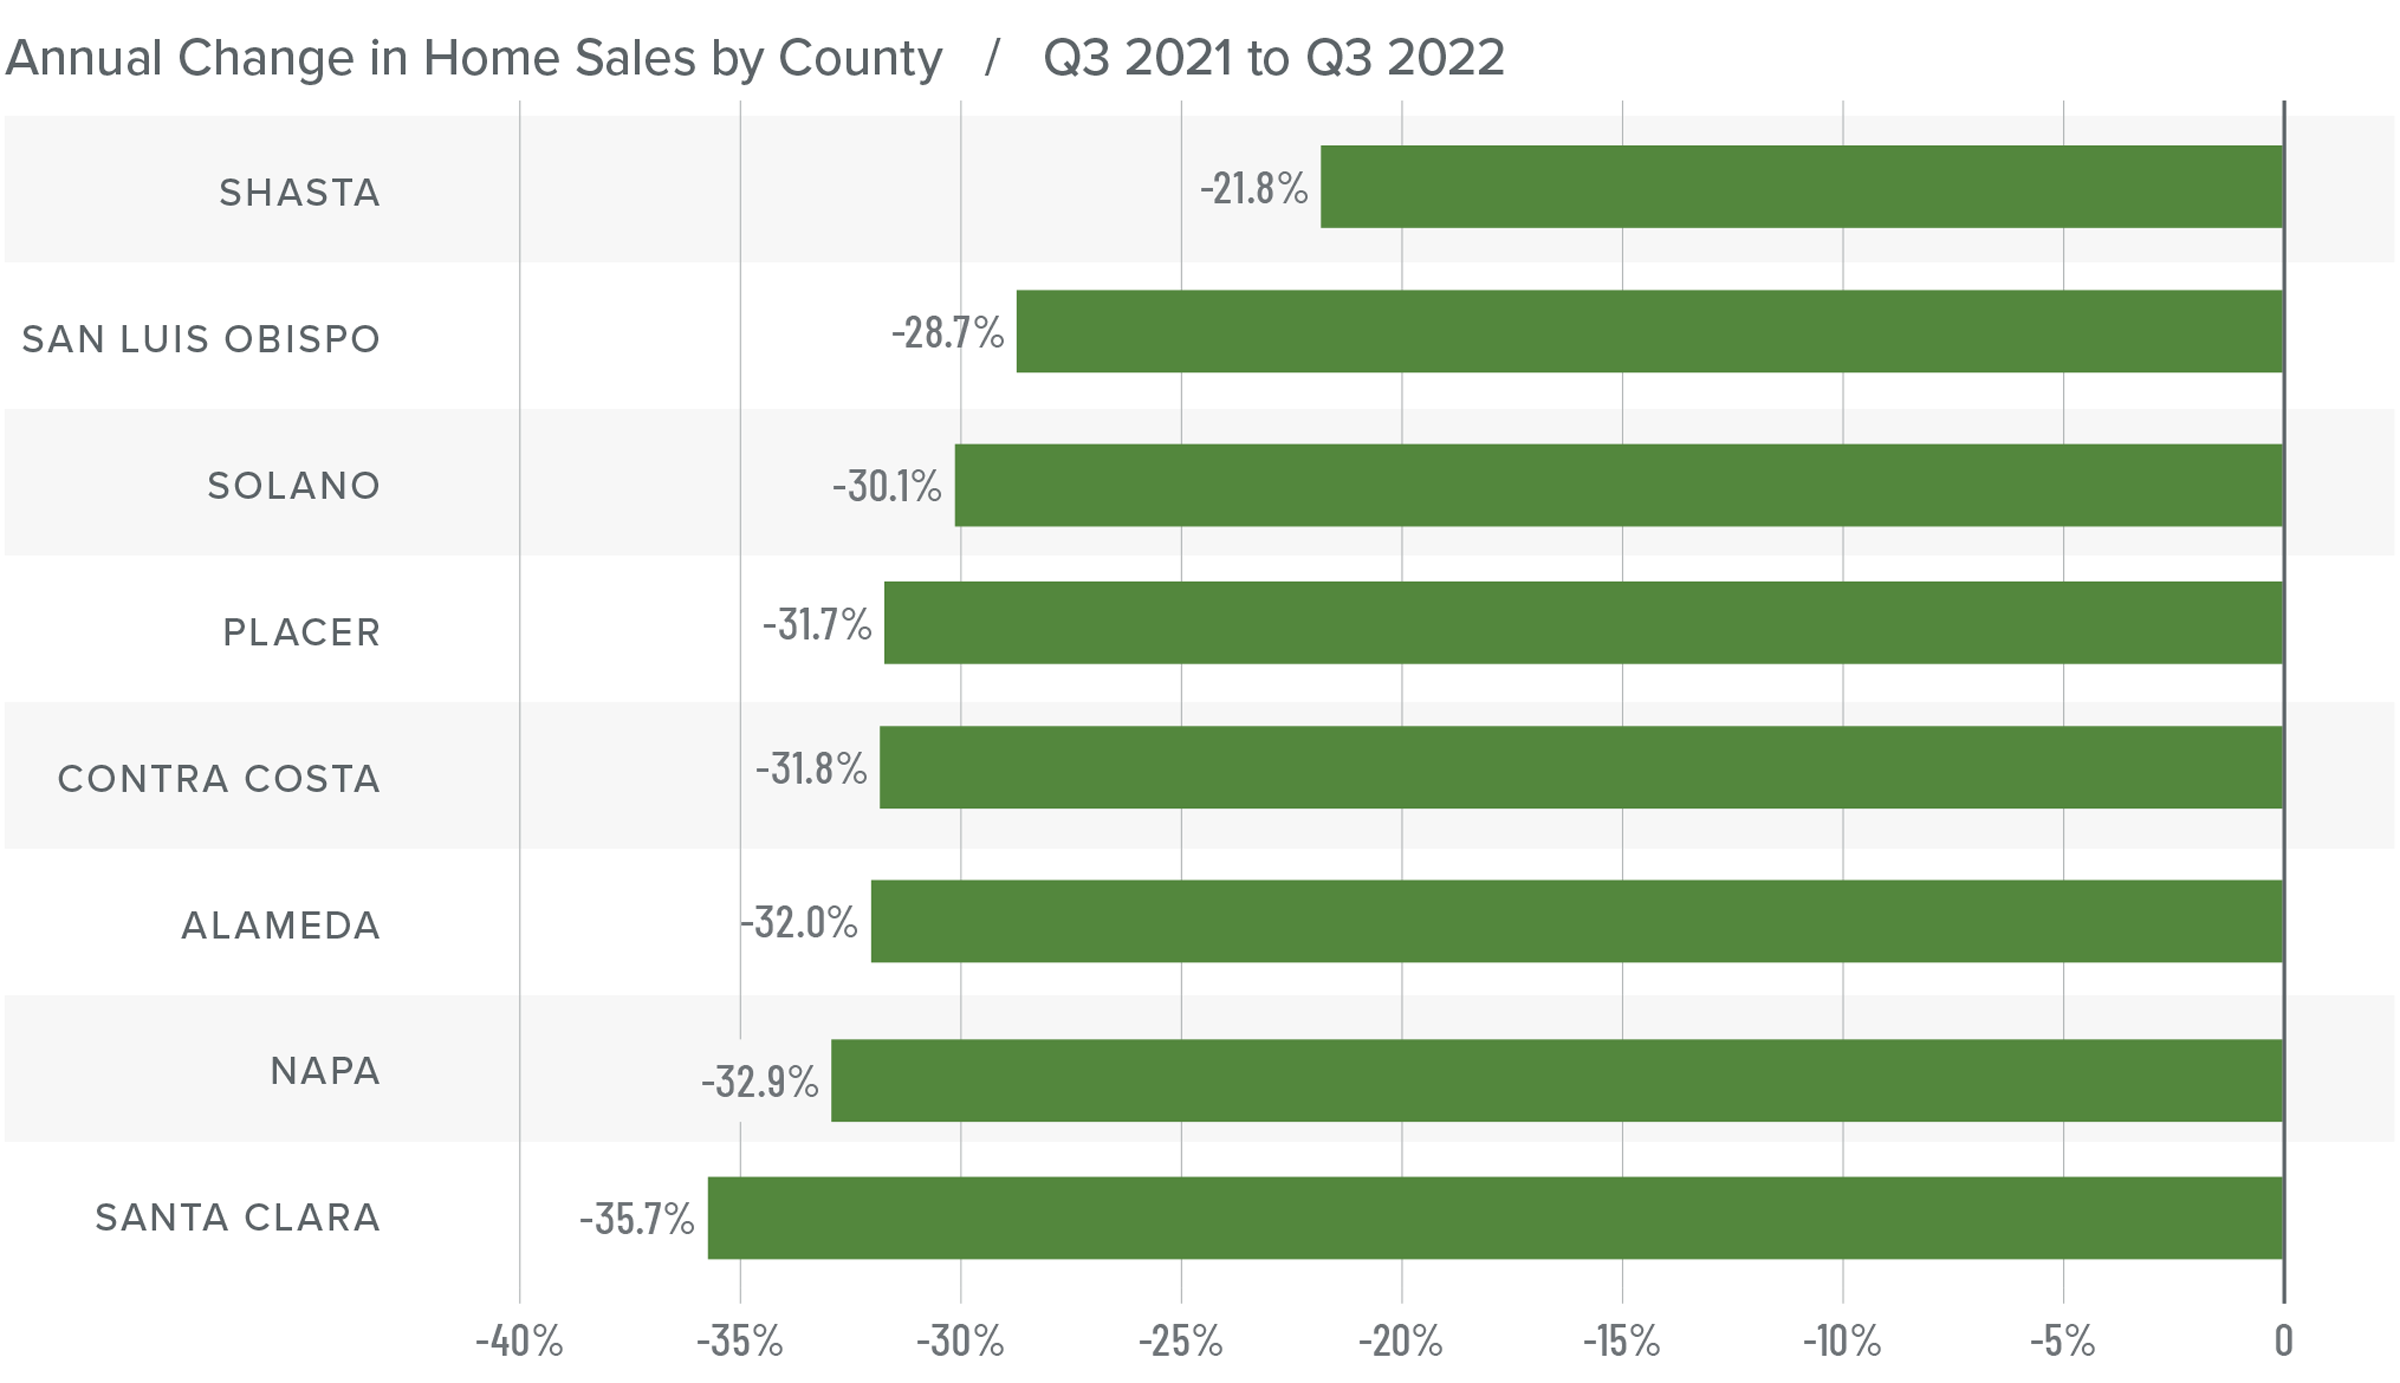 A bar graph showing the annual change in home sales for various counties in Northern California from Q3 2021 to Q3 2022. All counties have a negative percentage year-over-year change. Shasta County tops the list at -21.8%, followed by San Luis Obispo at -28.7%, Solano -30.1%, Placer -31.7%, Contra Costa -31.8%, Alameda -32%, Napa -32.9%, and Santa Clara at -35.7%.